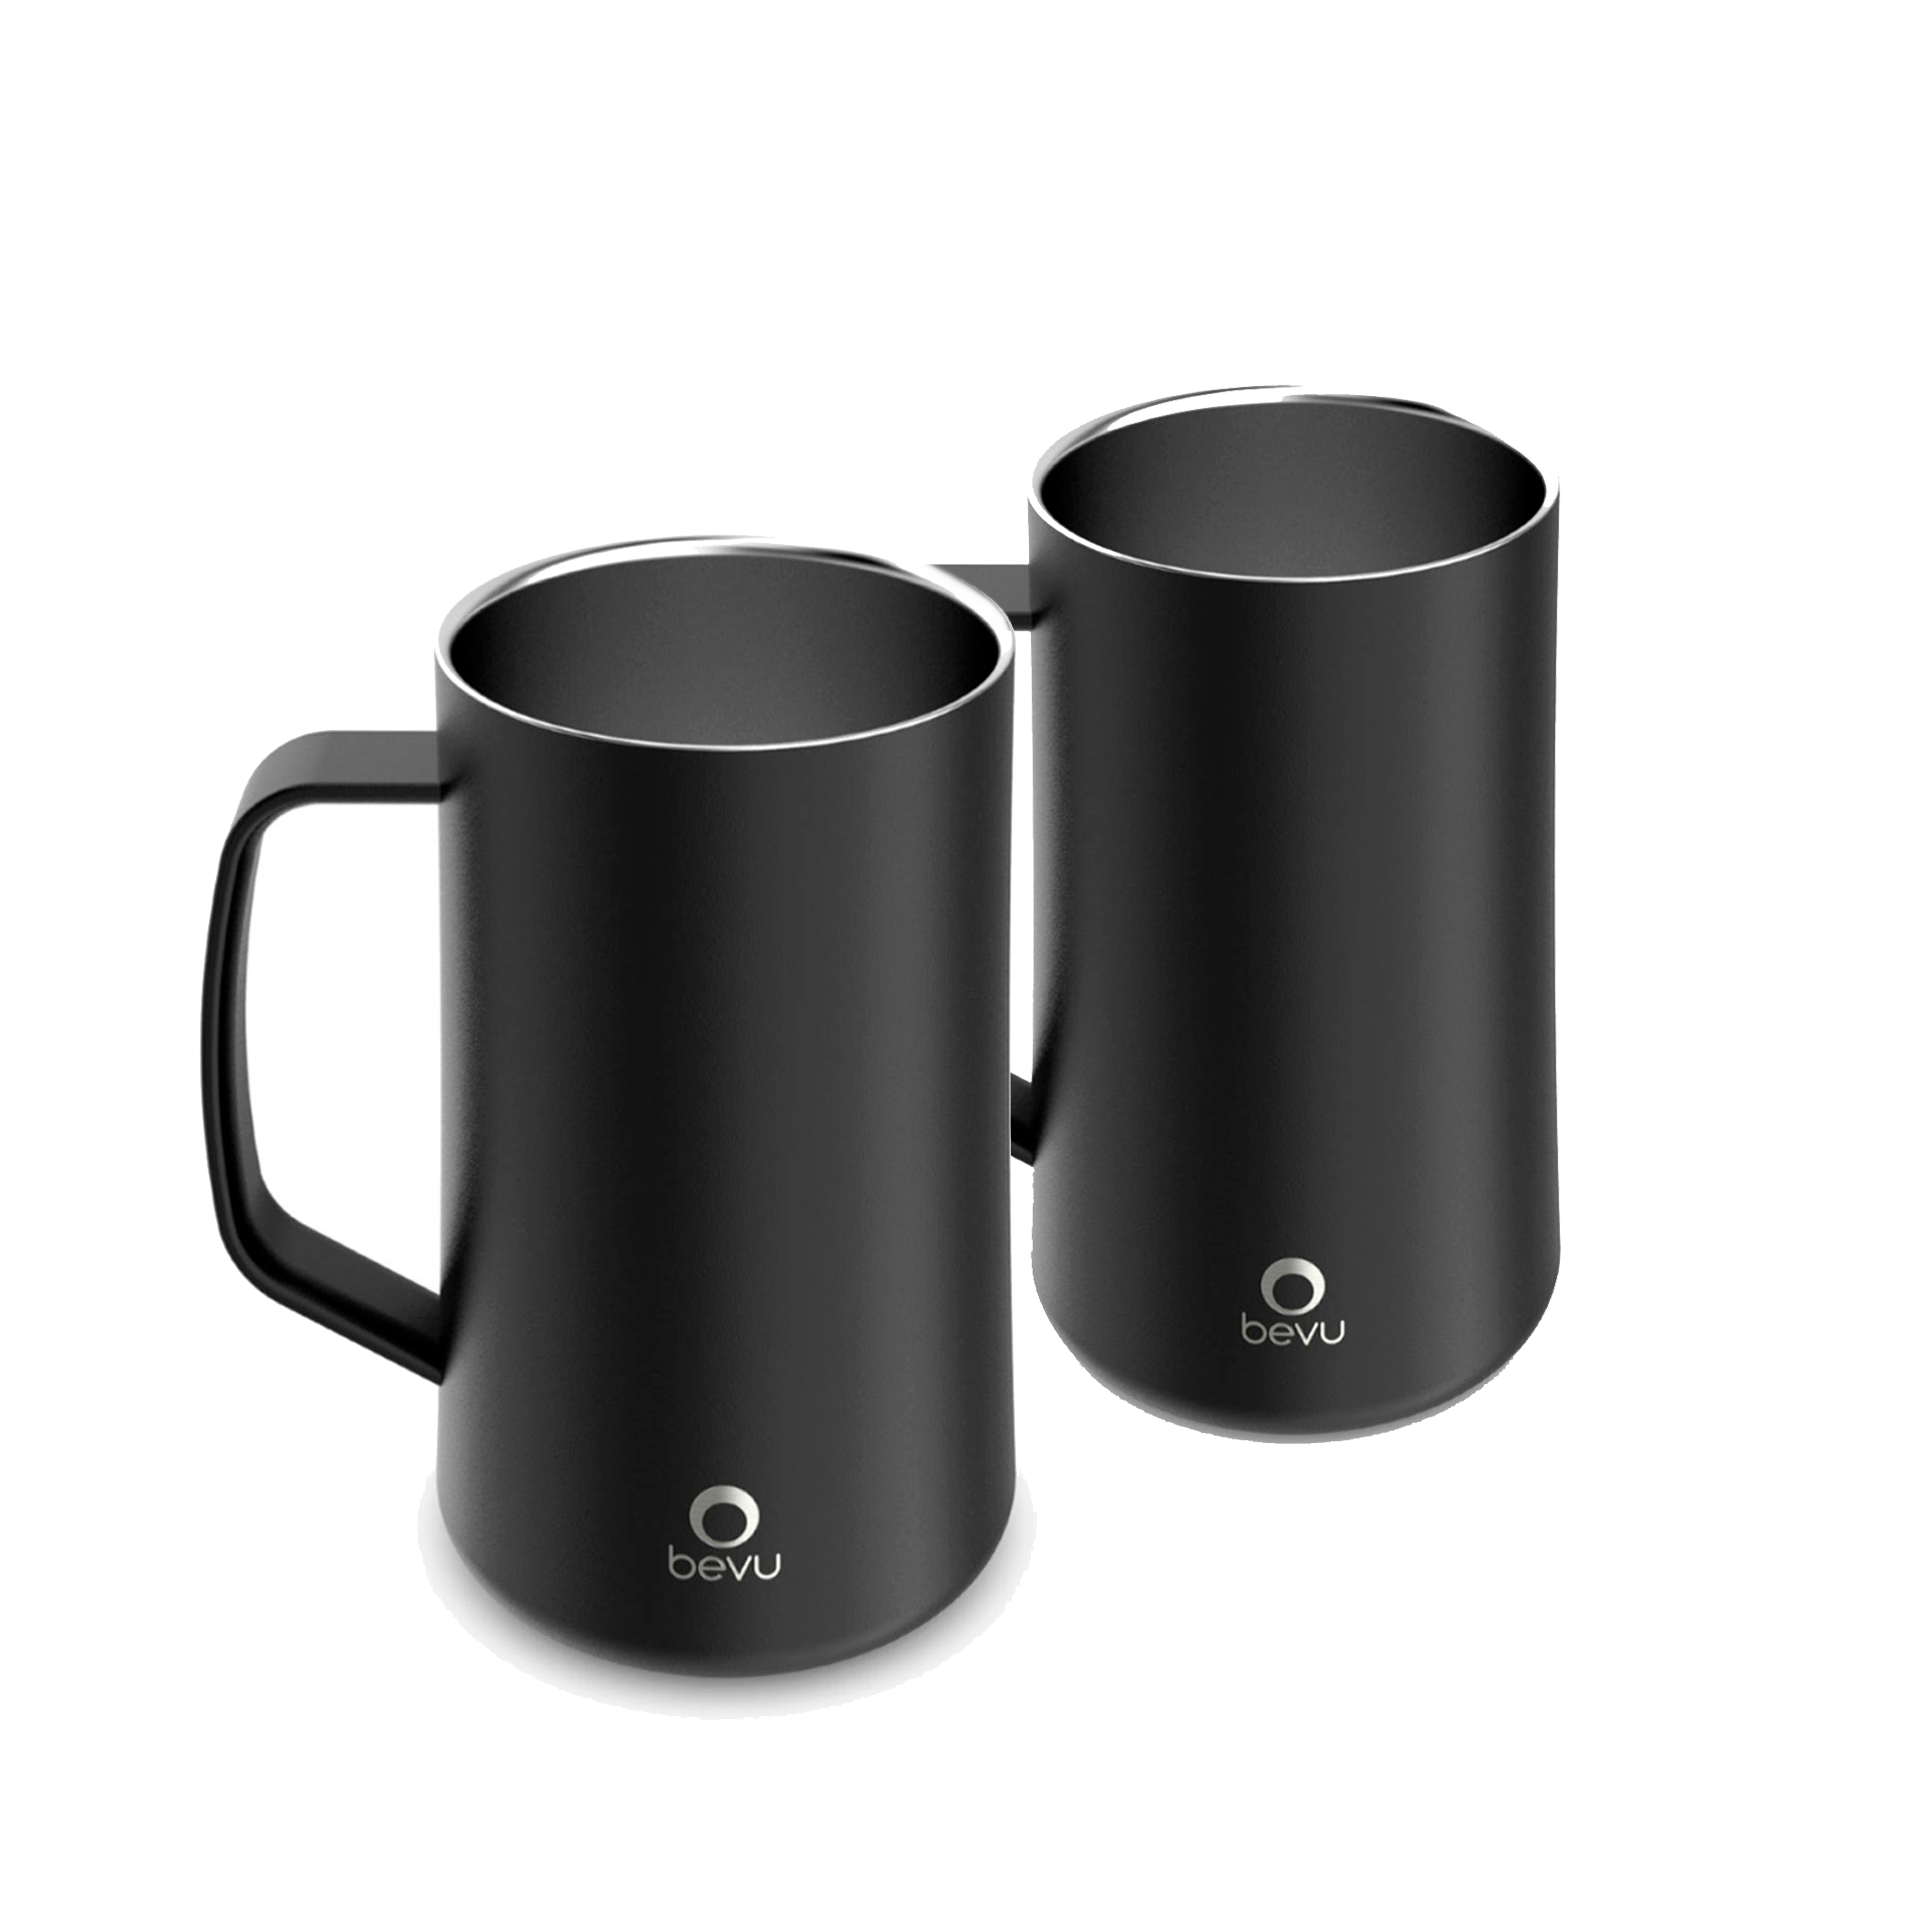 mage of Bevu Life's STEIN Beer Insulated Mug (2 Pack) 28oz, showcasing its sturdy design and ability to keep beer cold for longer. Perfect for enjoying cold beers with friends on any occasion.